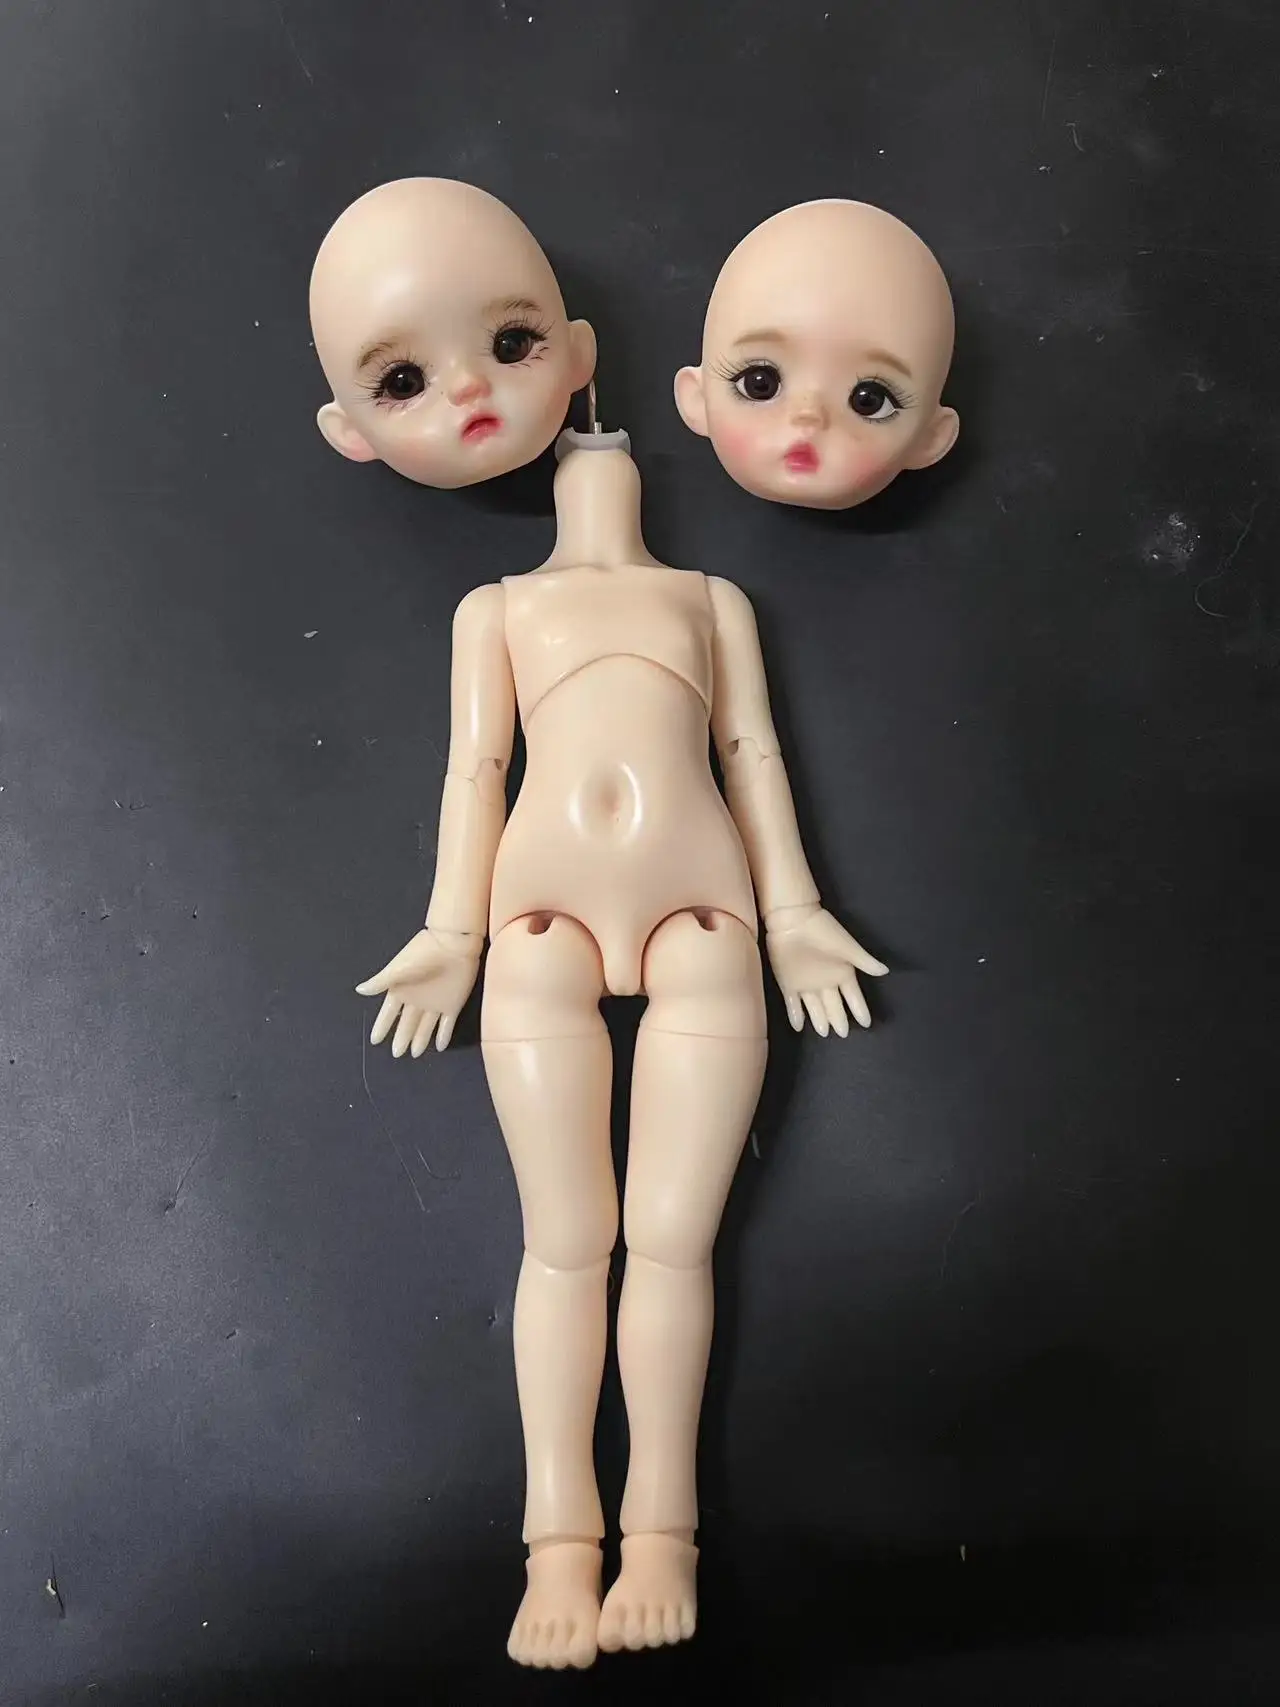 gaoshunBJD doll 1/6 1/8 dada chimu body didi zhuzhu freeshipping resin body mold present Ball-jointed dolls FOR SALE girls adult wreath girls pen holder flower pot silicone molds epoxy resin mold diy succulent planter mold for diy resin decors